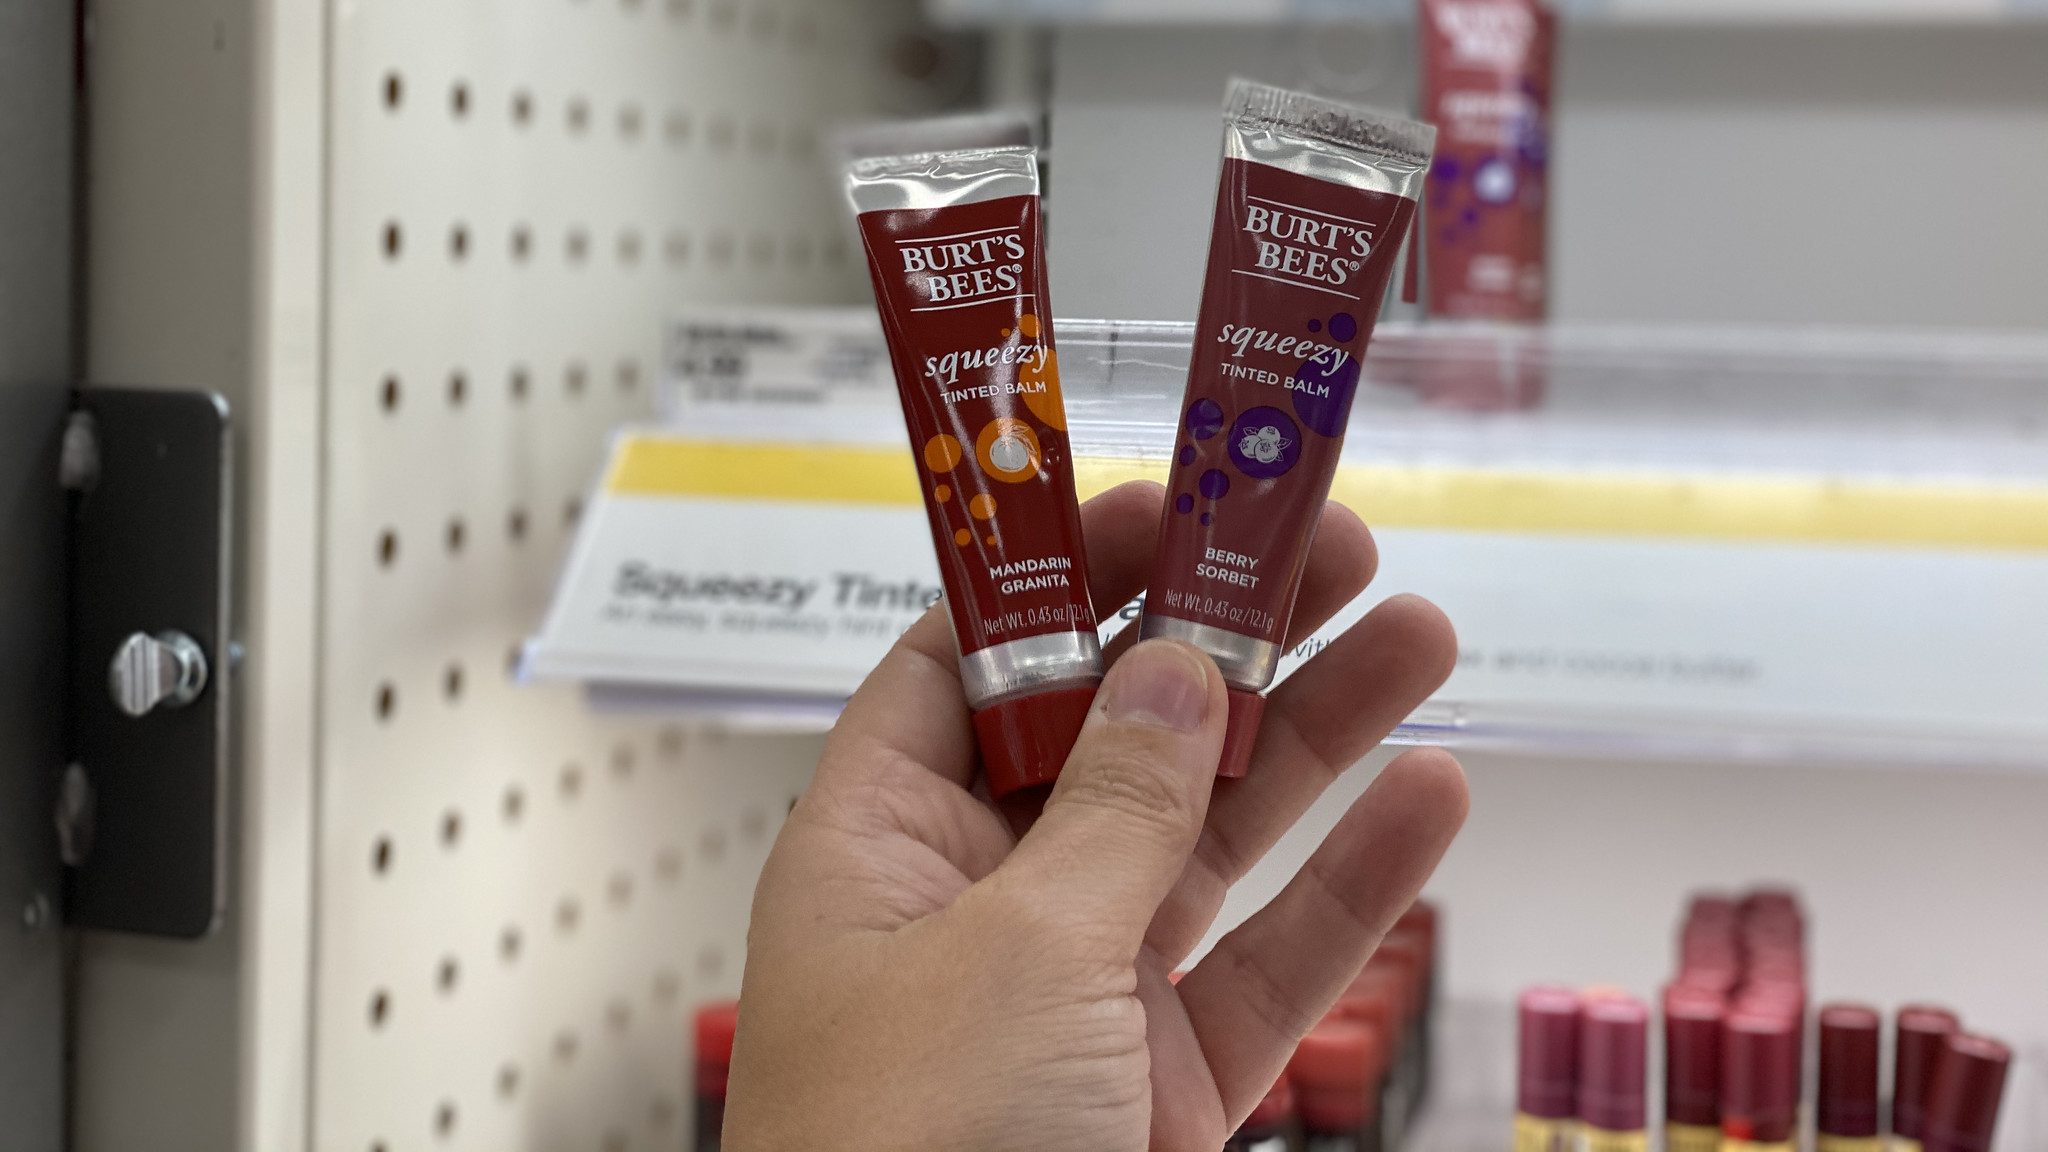 burt's bees squeesy lip balm in hand in store